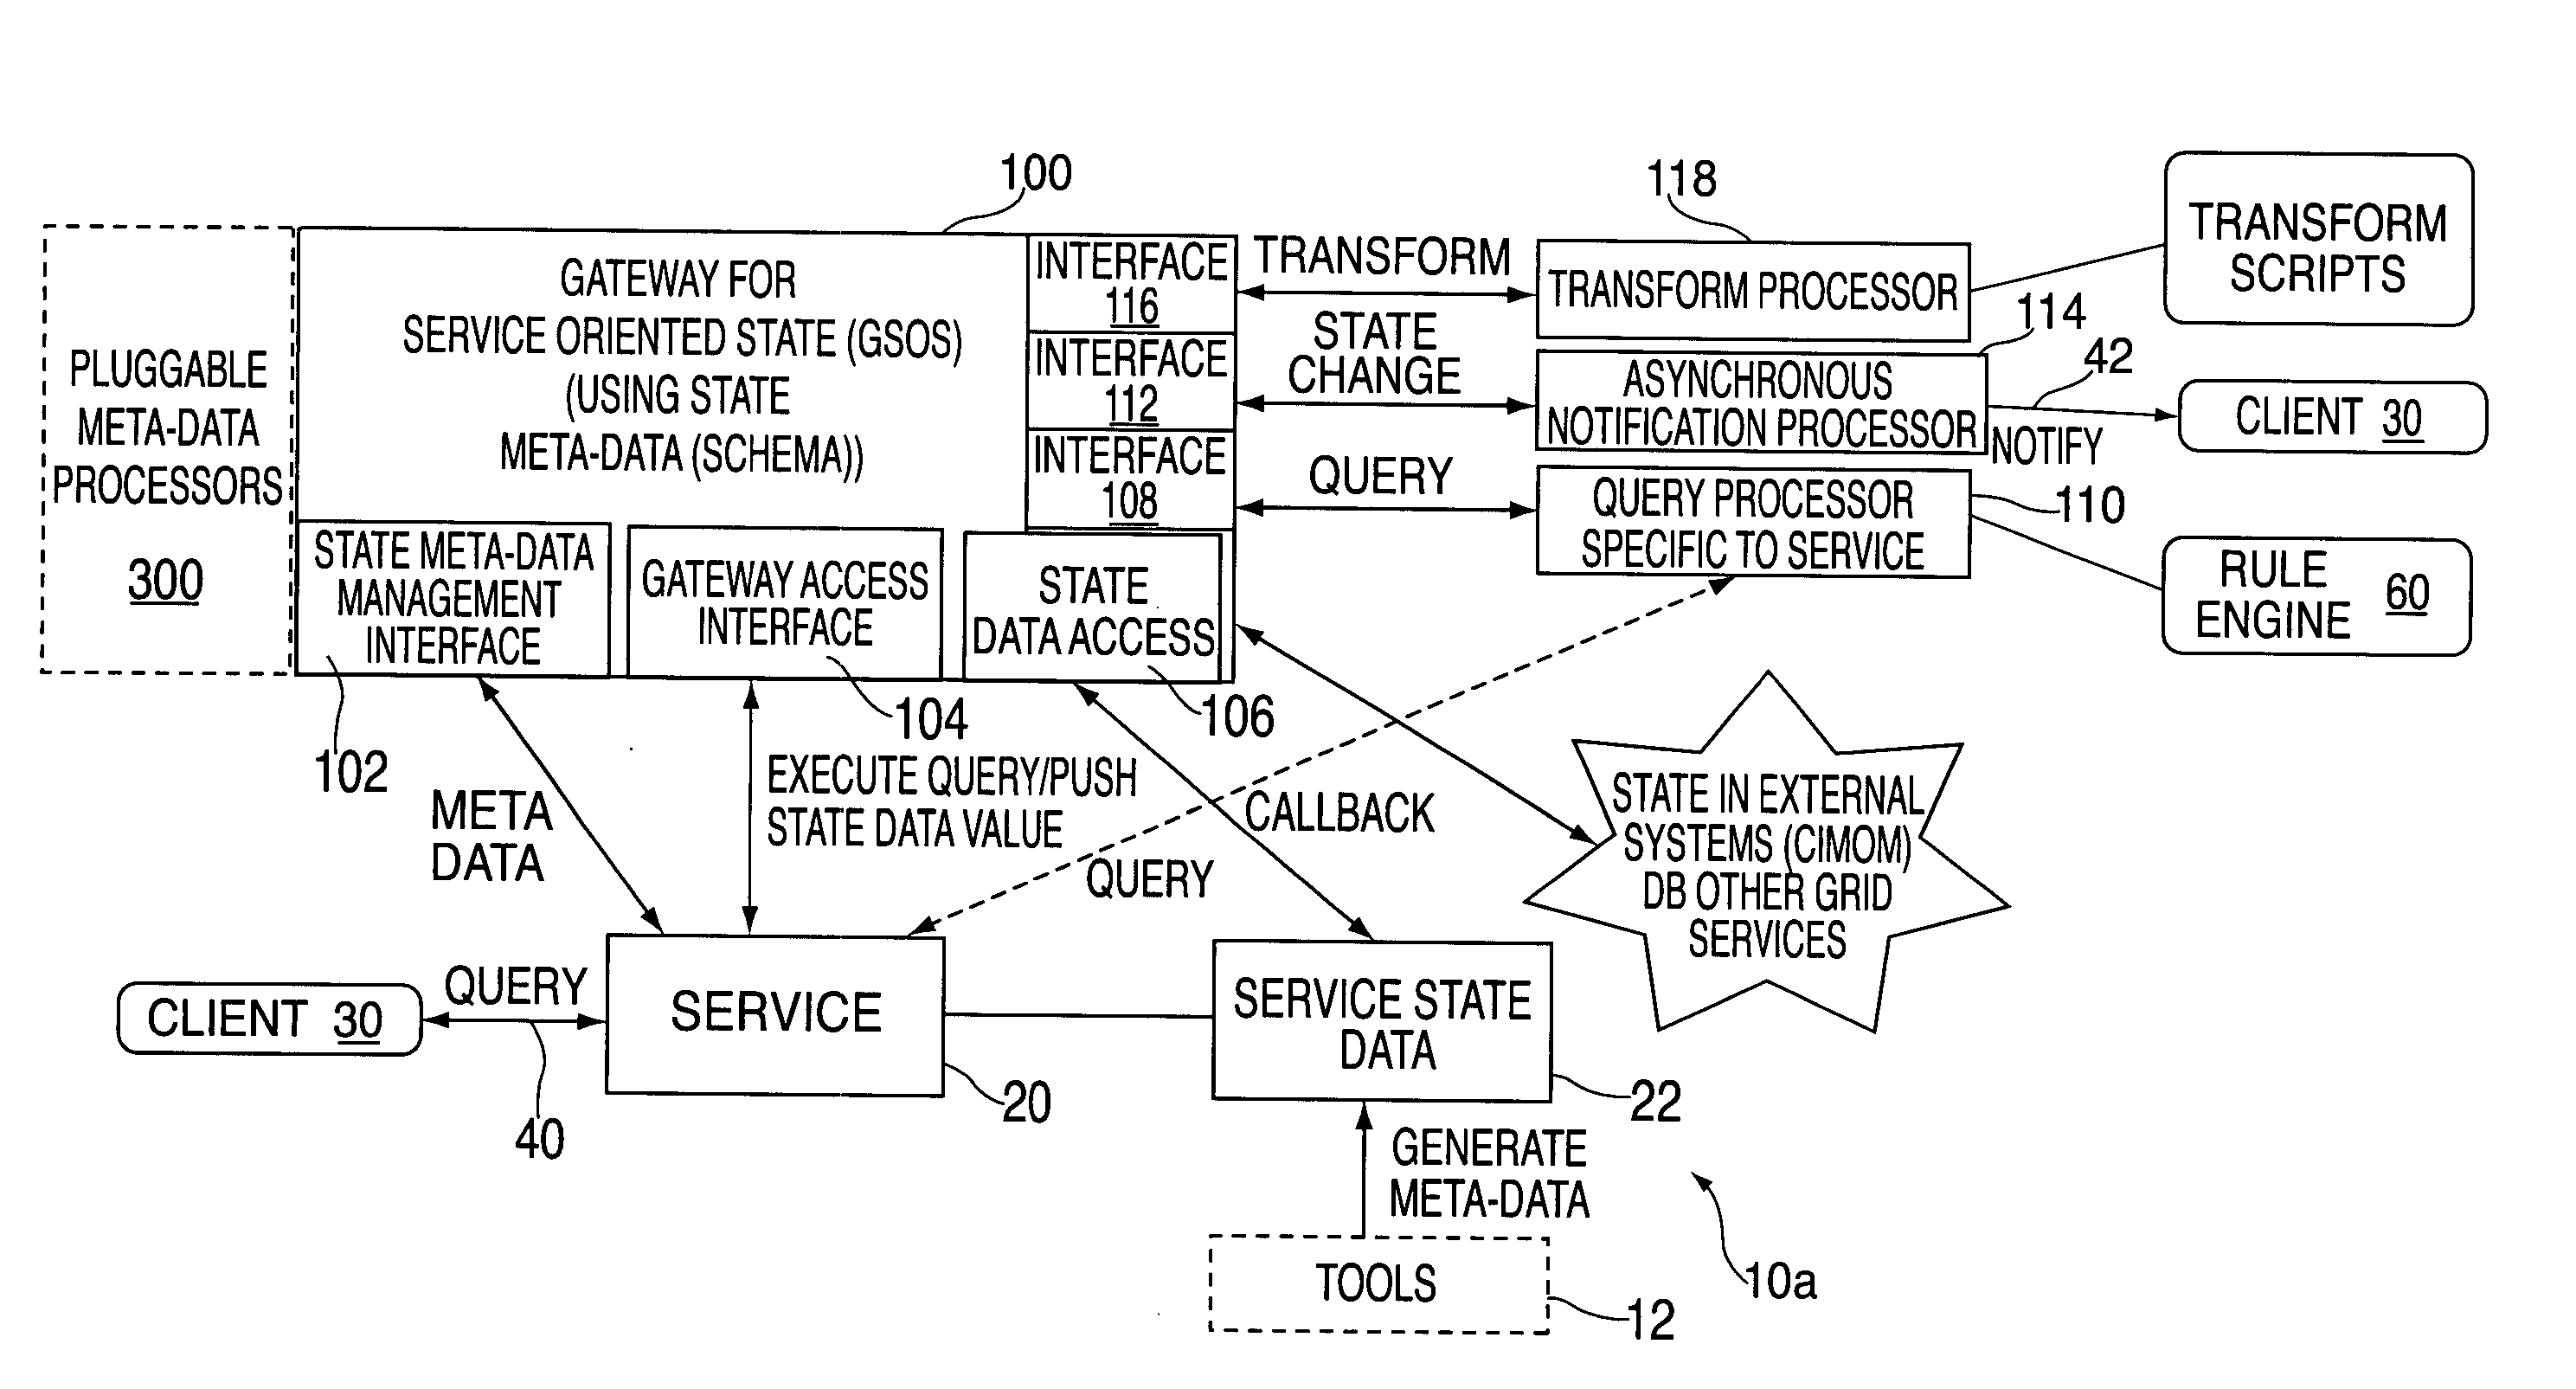 Pluggable state meta-data processors based on meta information modeling in a service oriented architecture